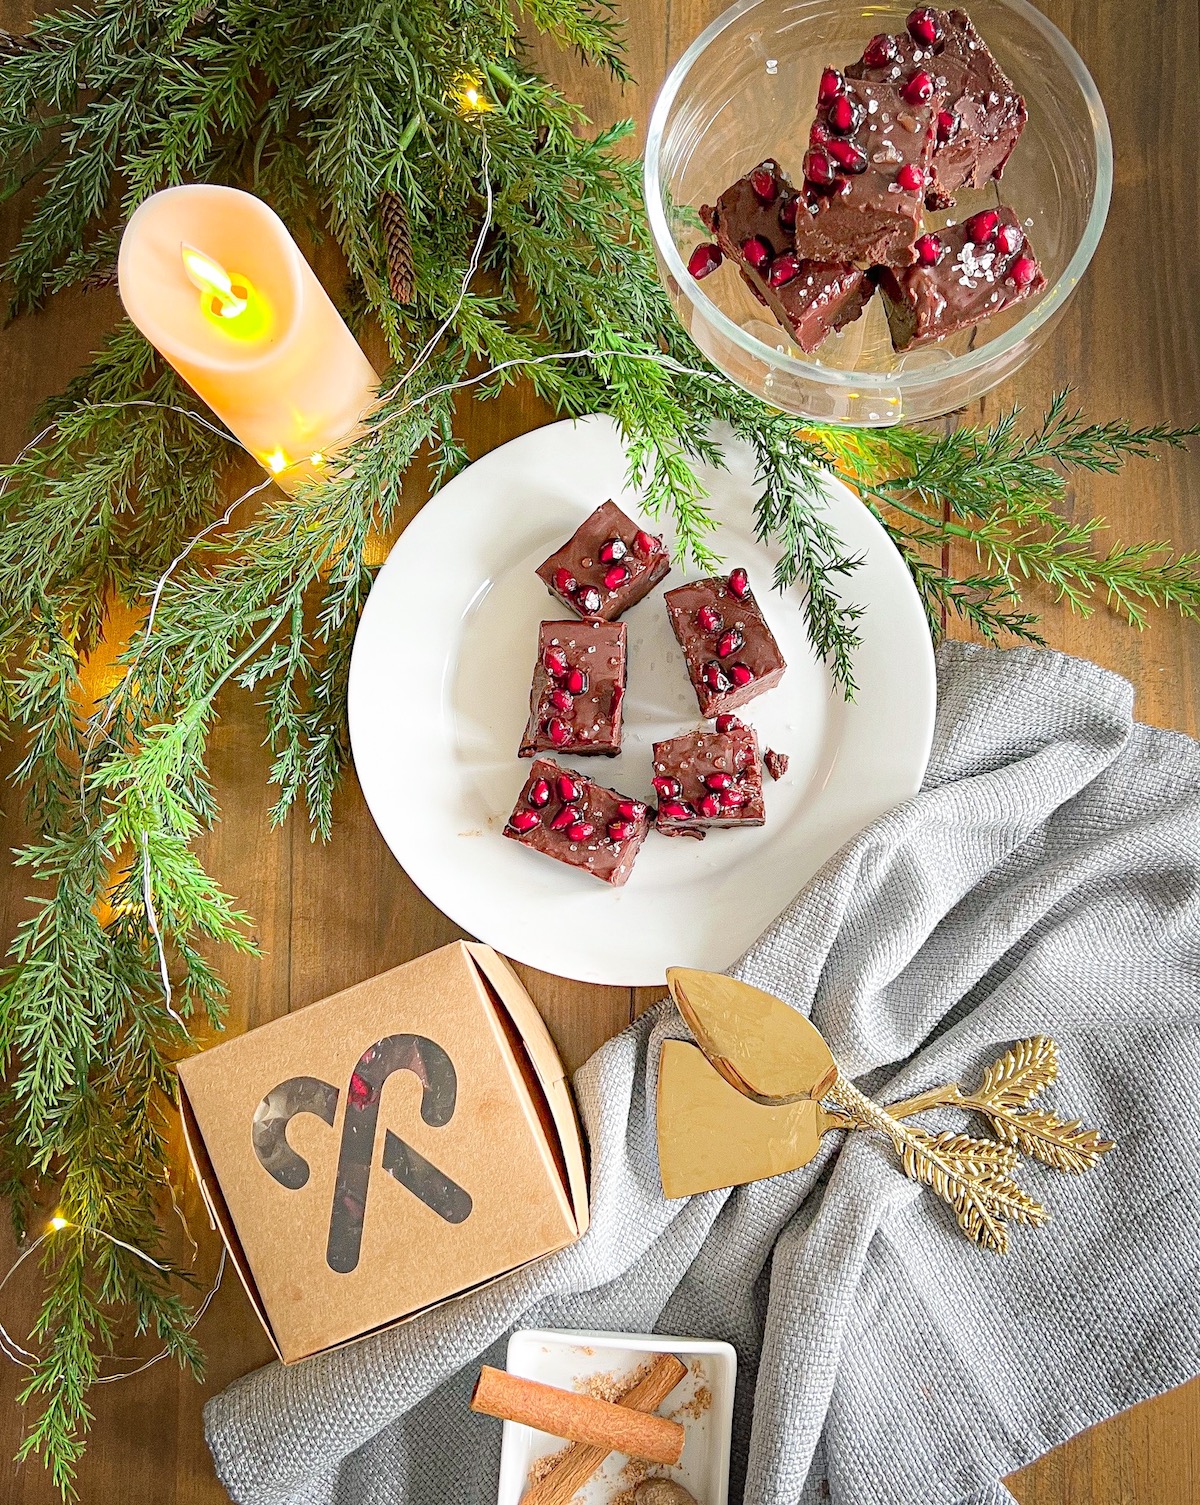 spiced fudge squares in a white plate, on a glass pedestal, and in a holiday treat box with Christmas greenery and lit candle